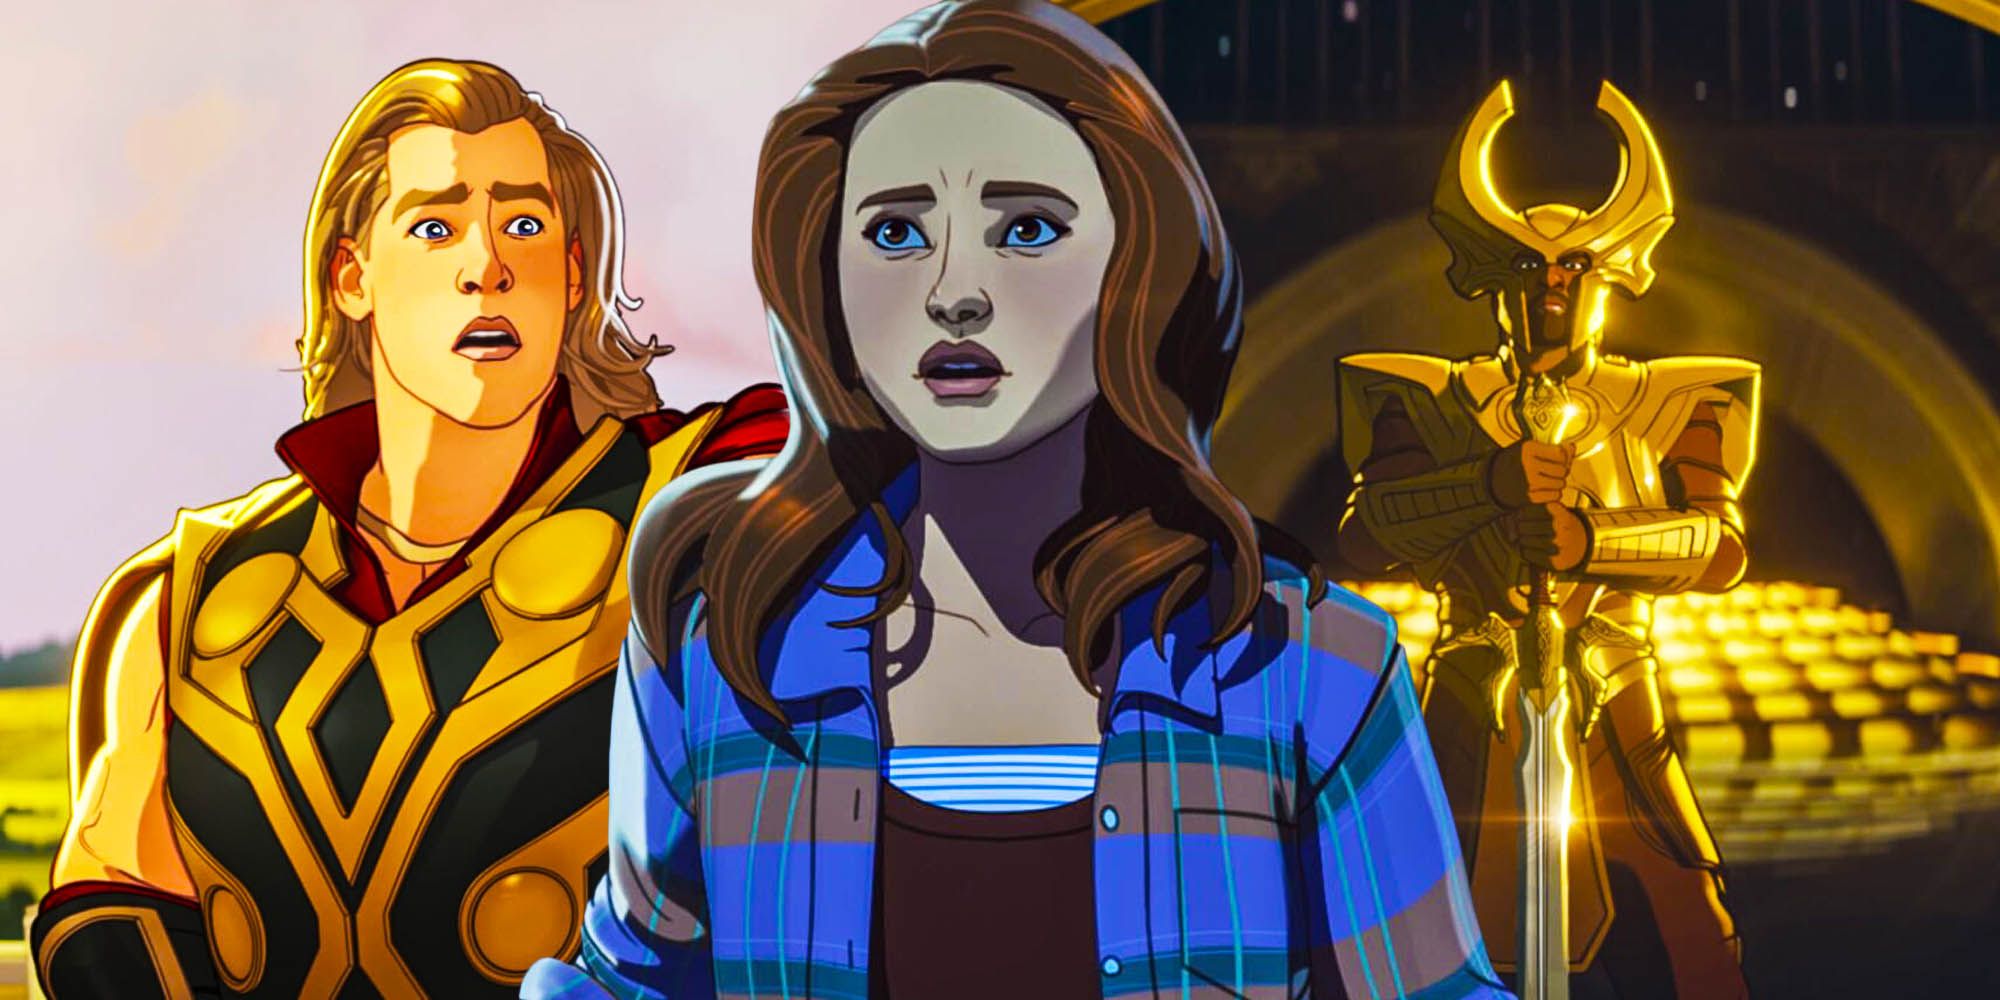 Split image of Jane Foster, Thor, and Heimdall from What If..? animated series.